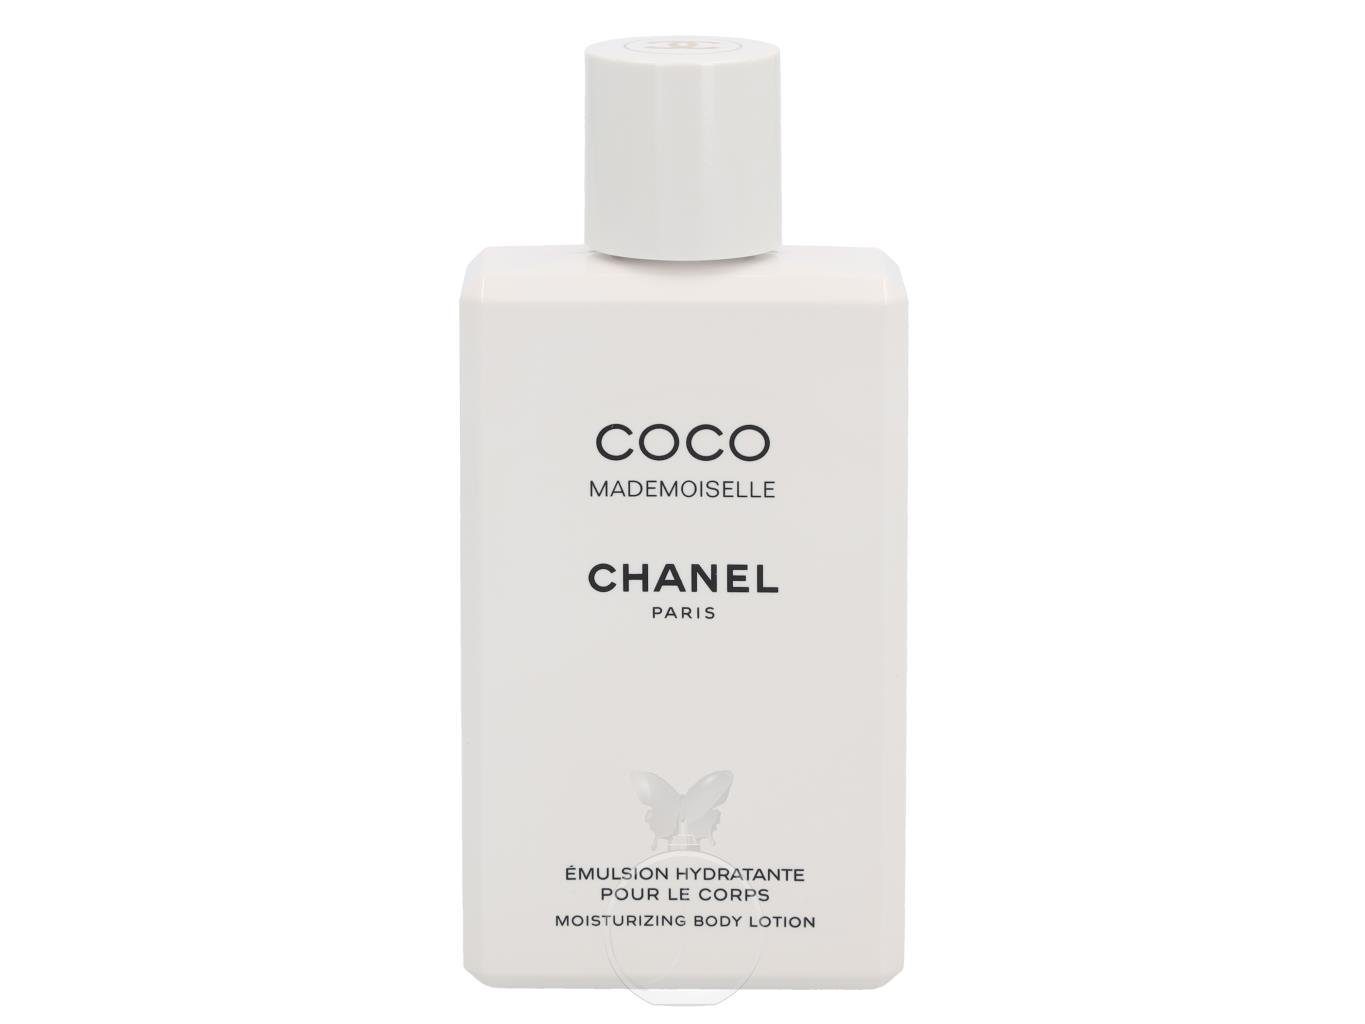 Coco Mademoiselle Moisturizing Body Lotion (Made In USA) 200ml/6.8oz from  Chanel to Germany. CosmoStore Germany